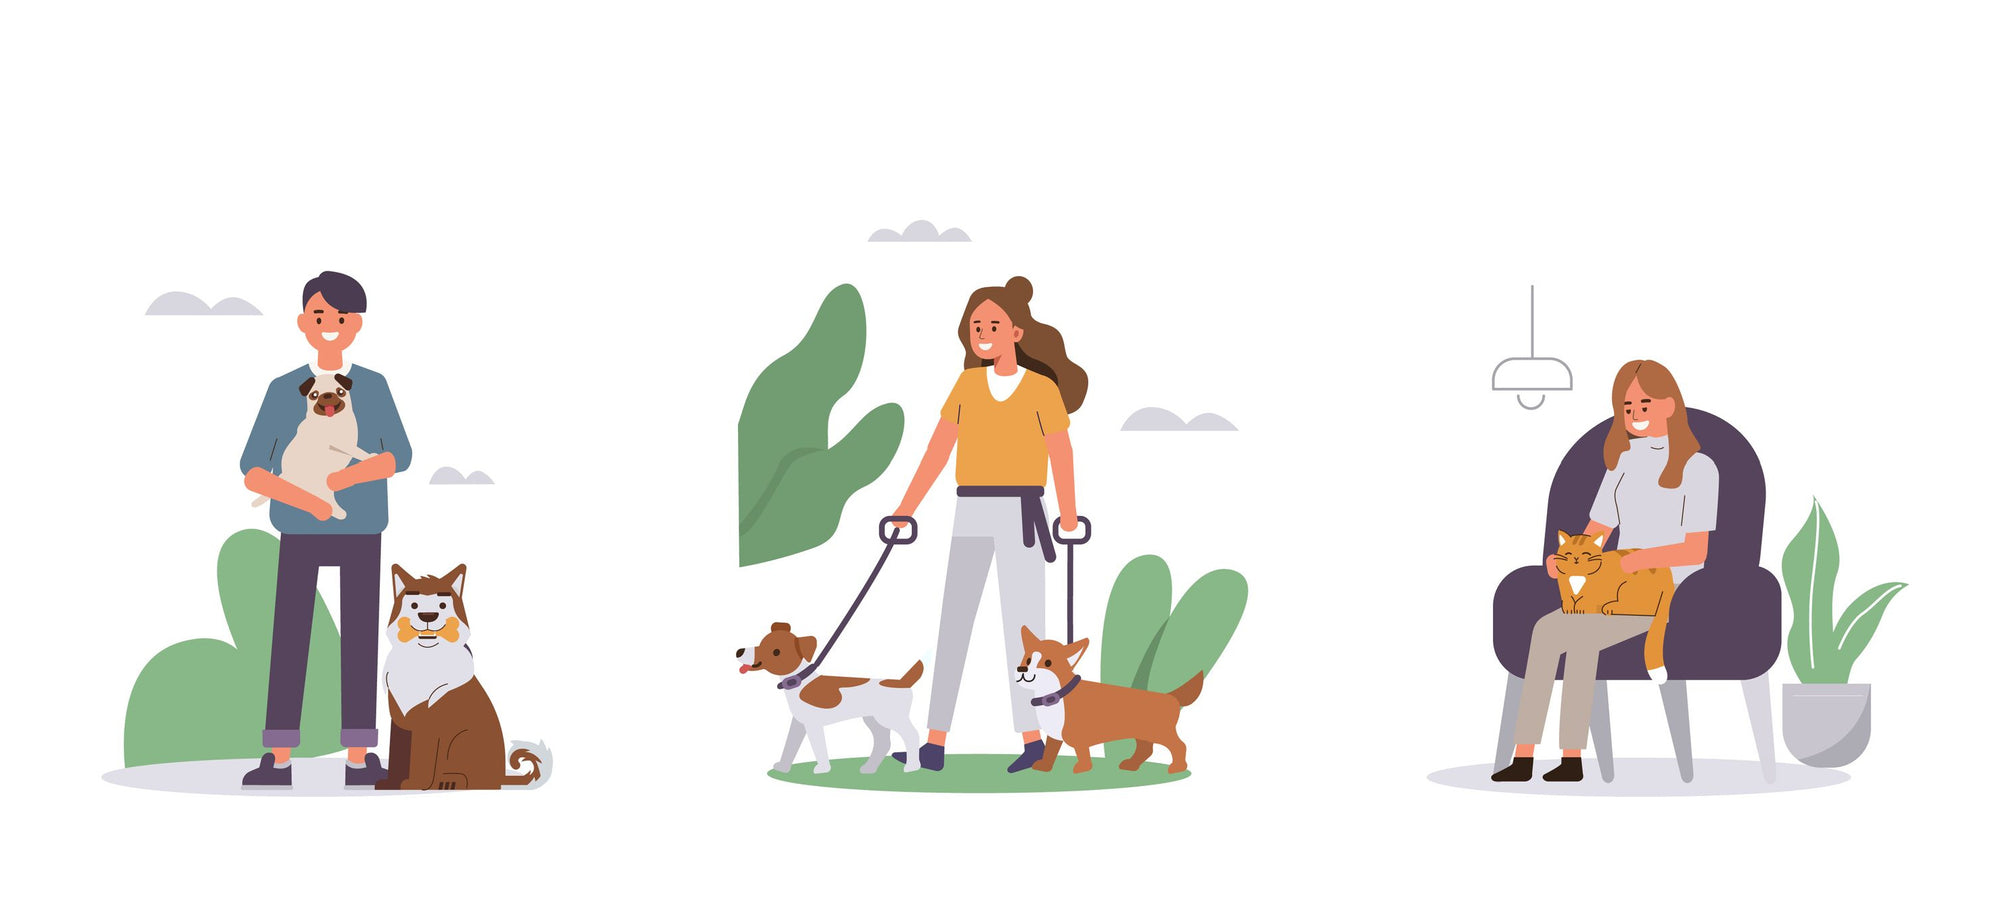 A woman walking dogs on leashes, a man holding a dog, and a woman sitting on a chair holding a cat in a store article image.